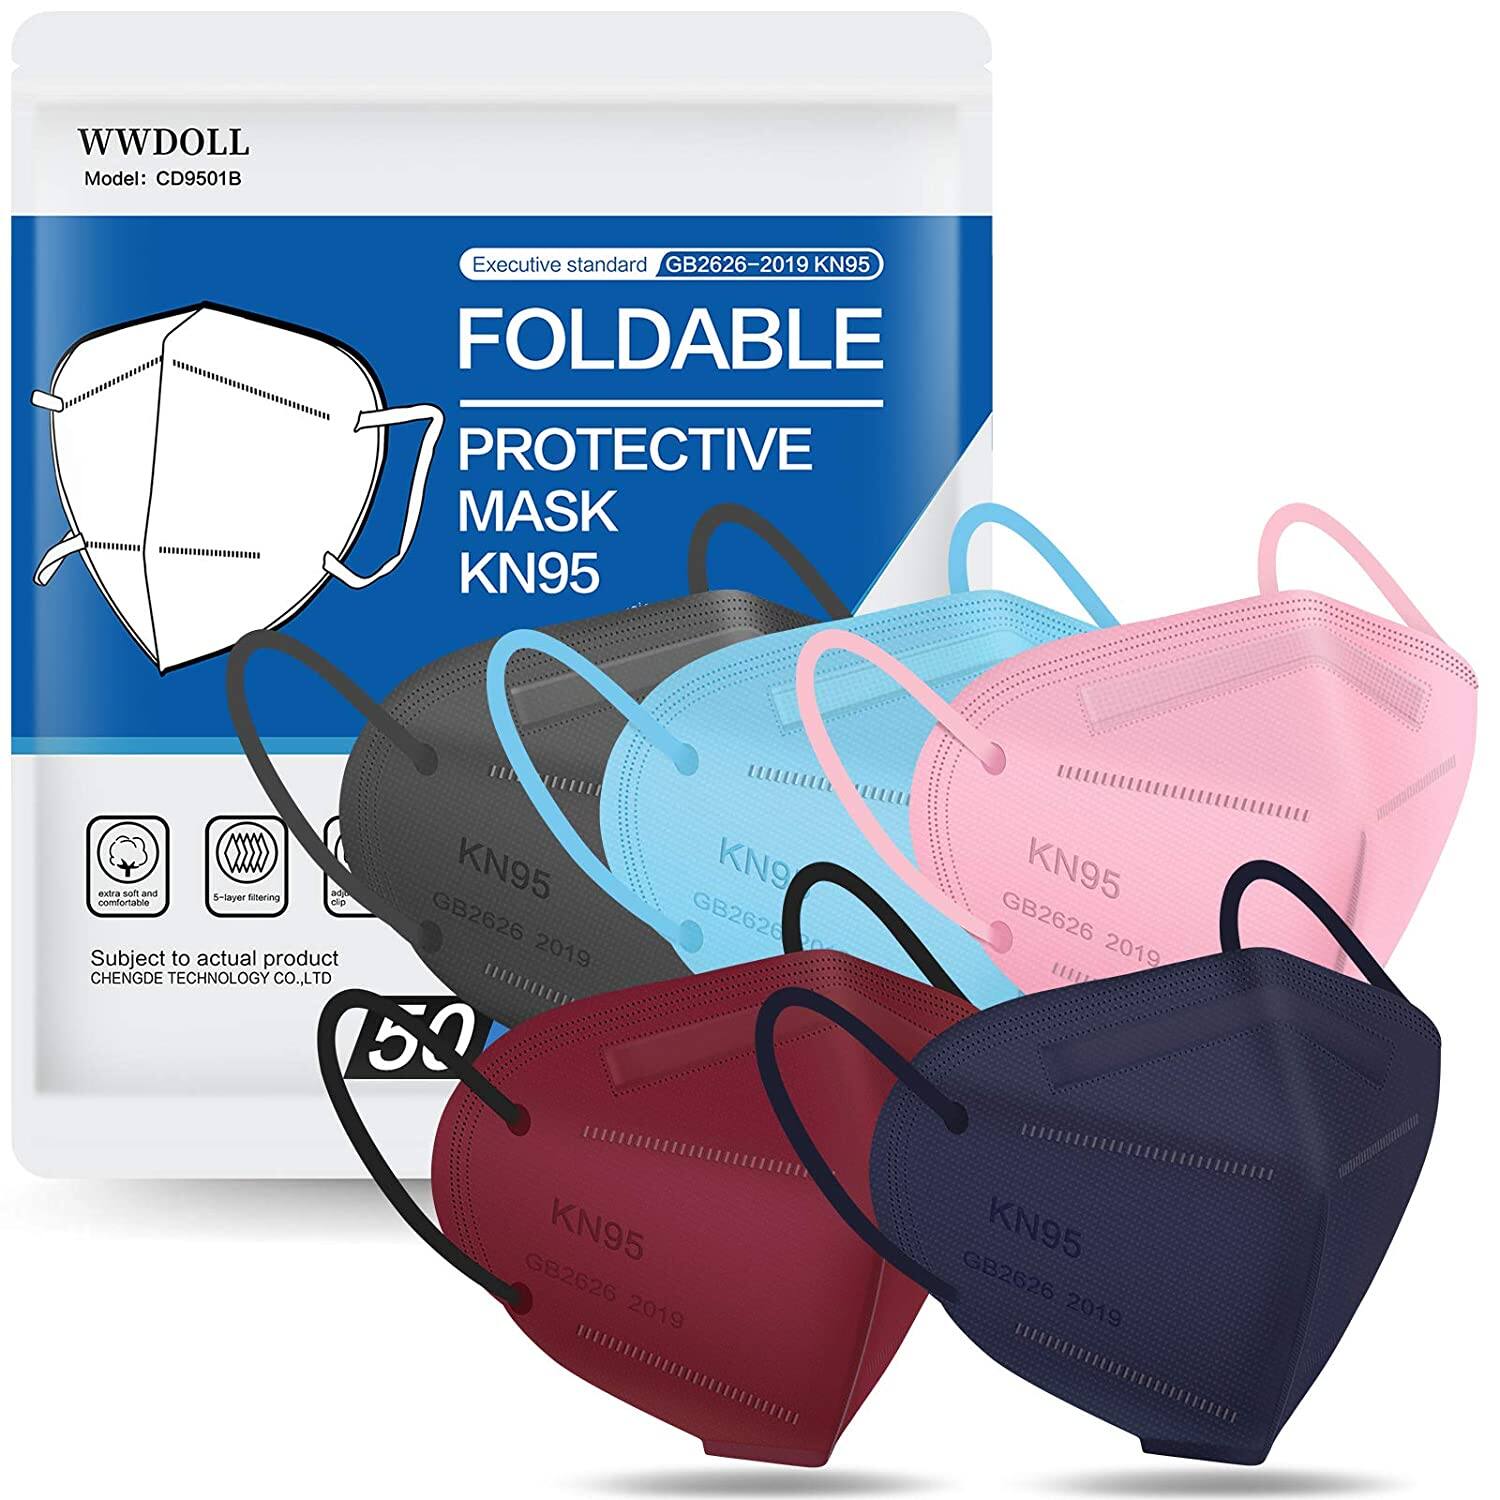 50-Pack WWDOLL New Model GB2626-2019 Protect KN95 Mask(Multicolor) Only $17.6 + Free S/H